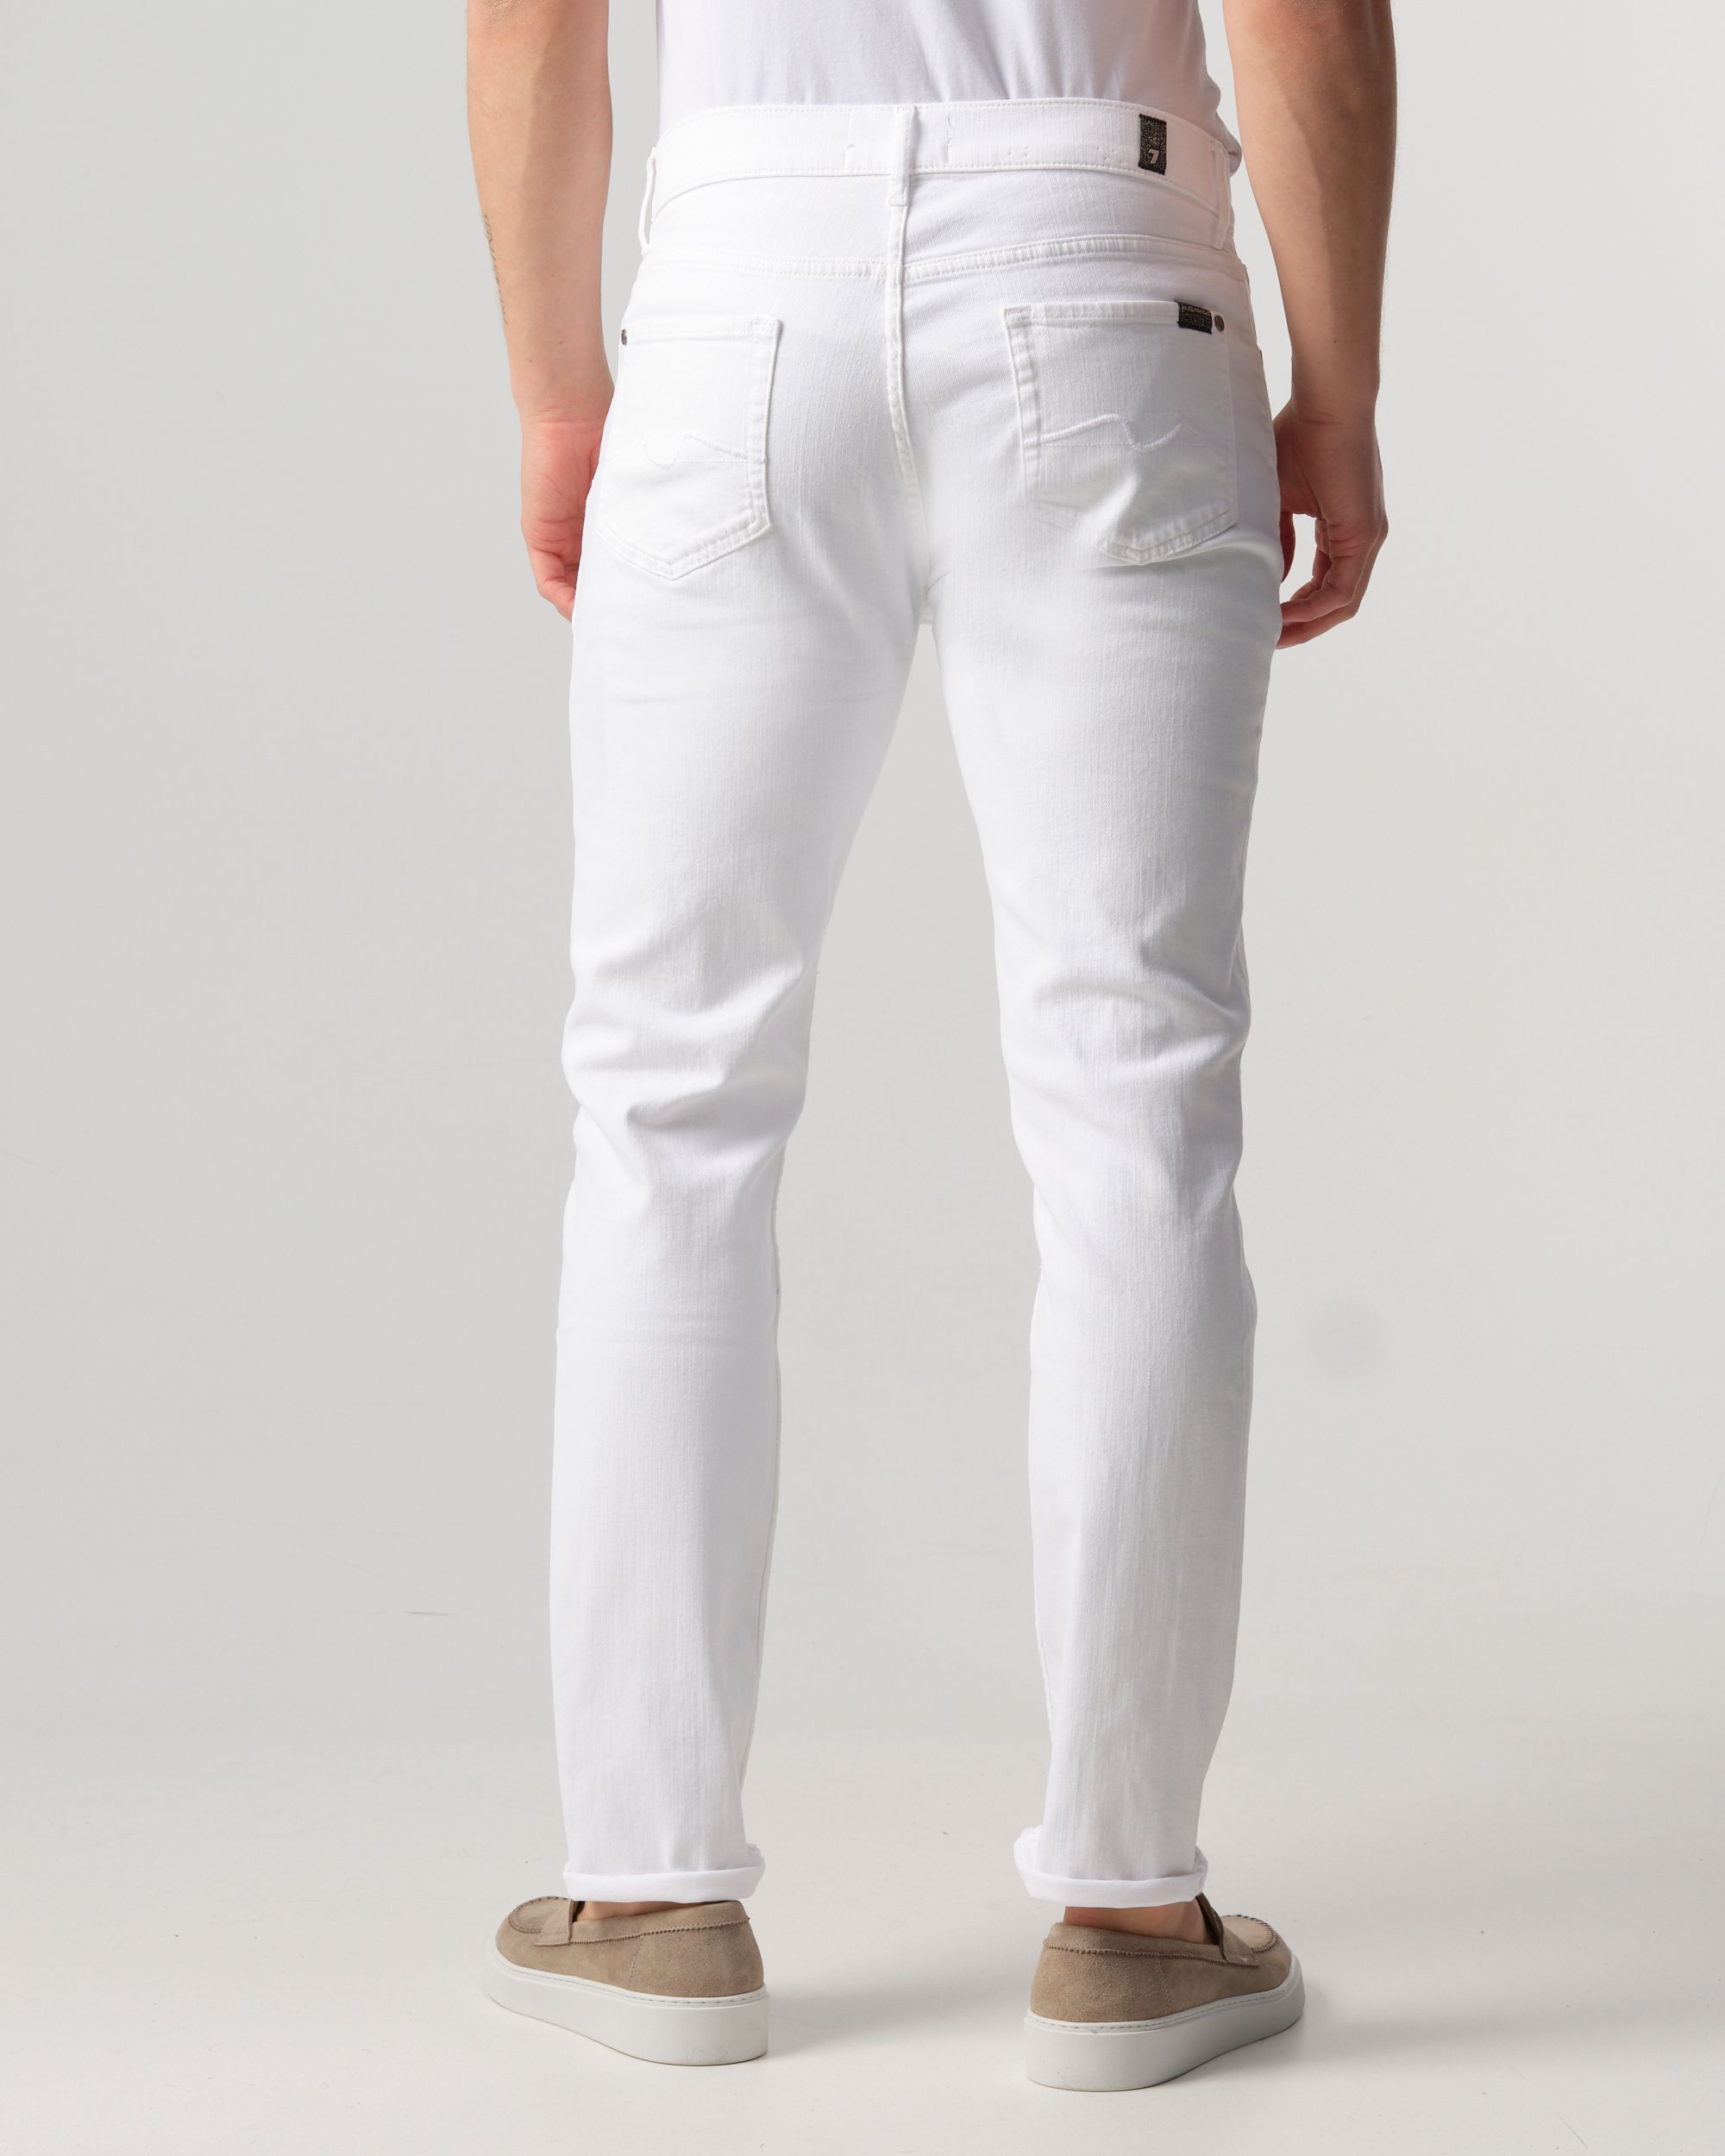 Seven for all mankind Slimmy Tapered Jeans Wit 094724-001-30